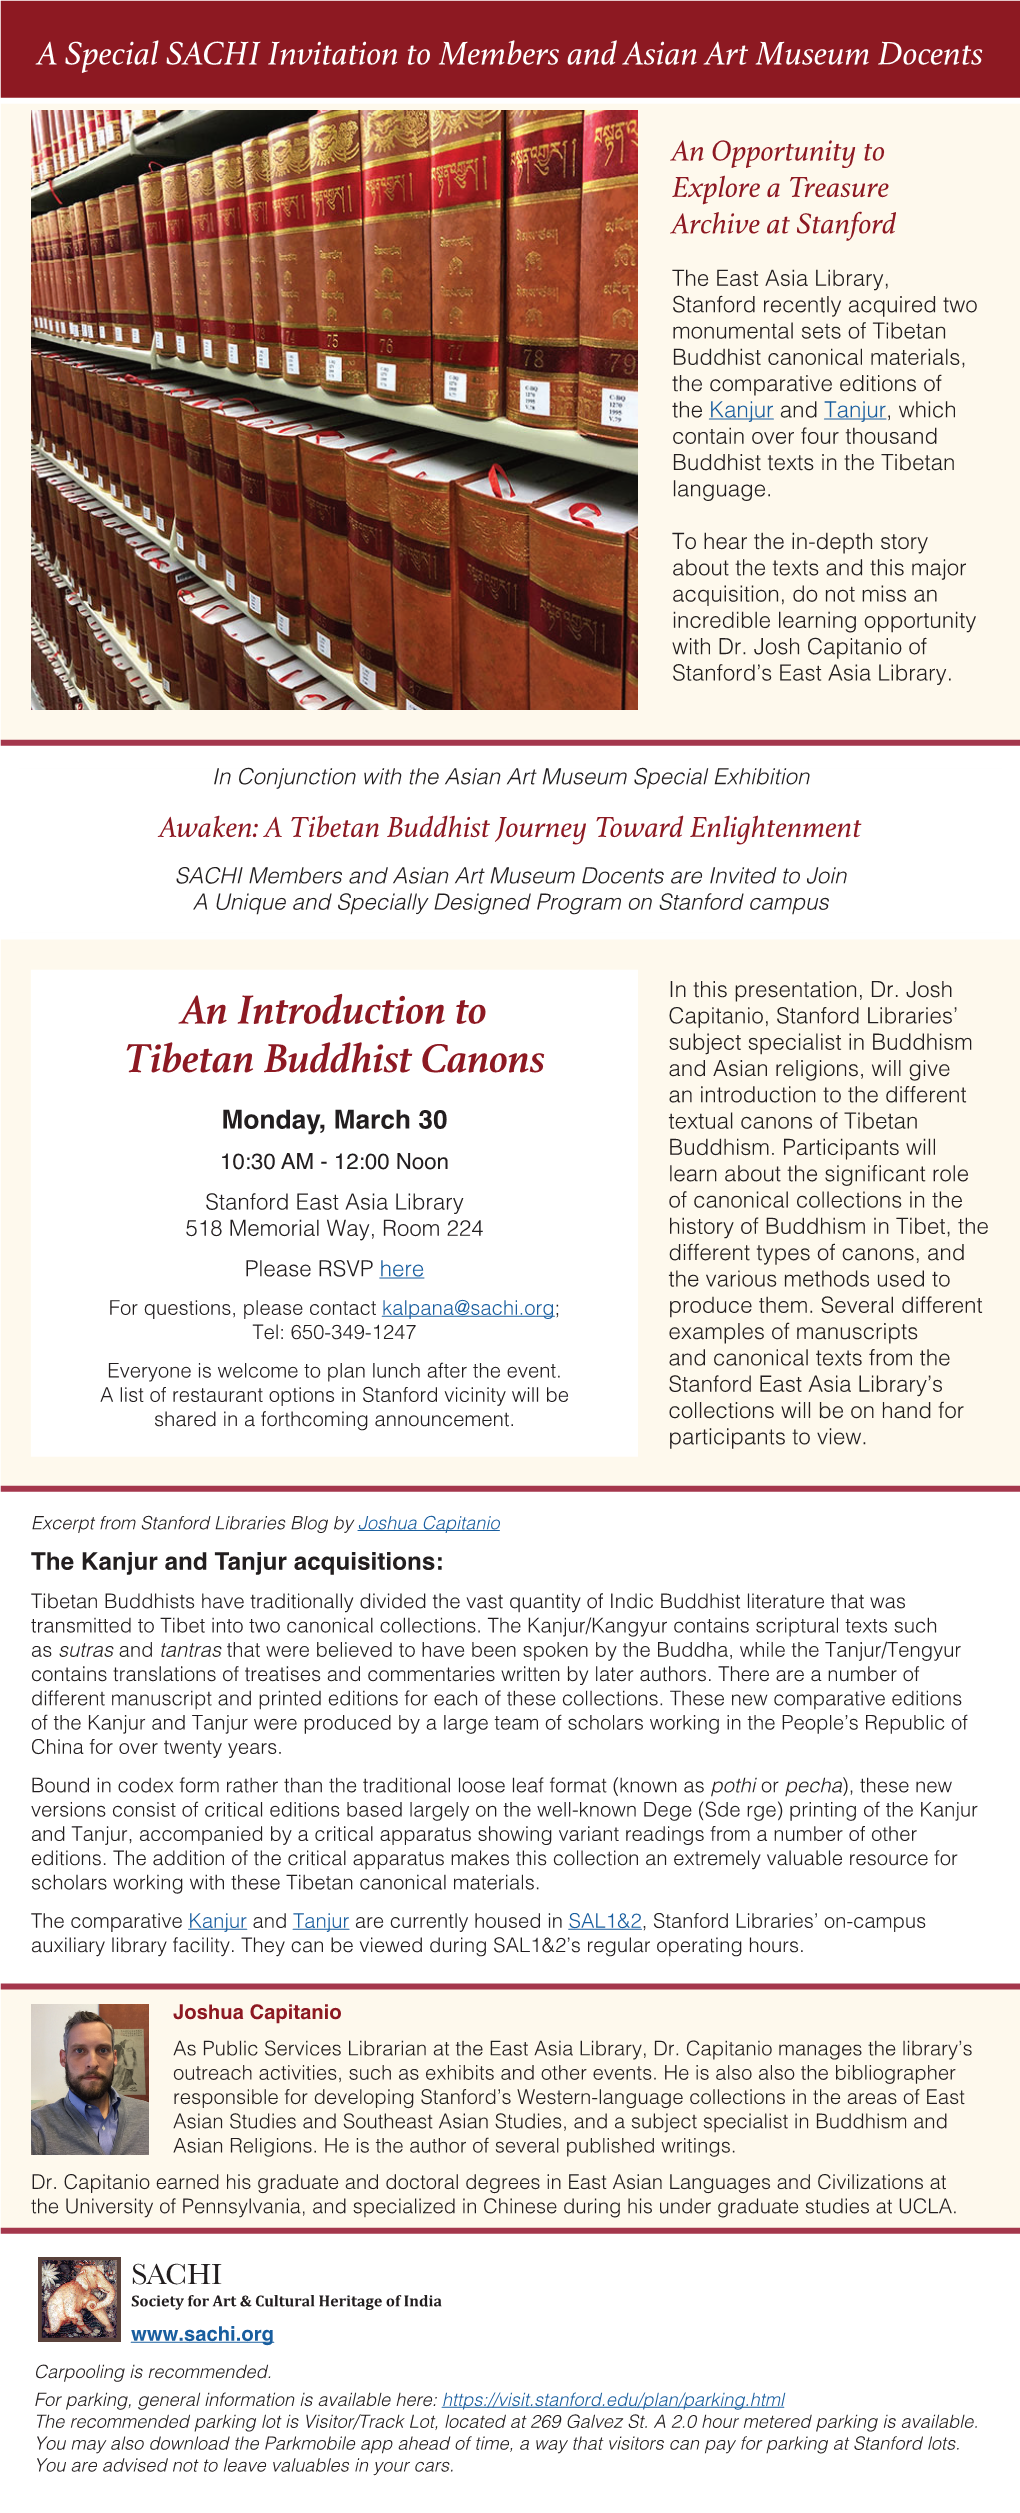 An Introduction to Tibetan Buddhist Canons